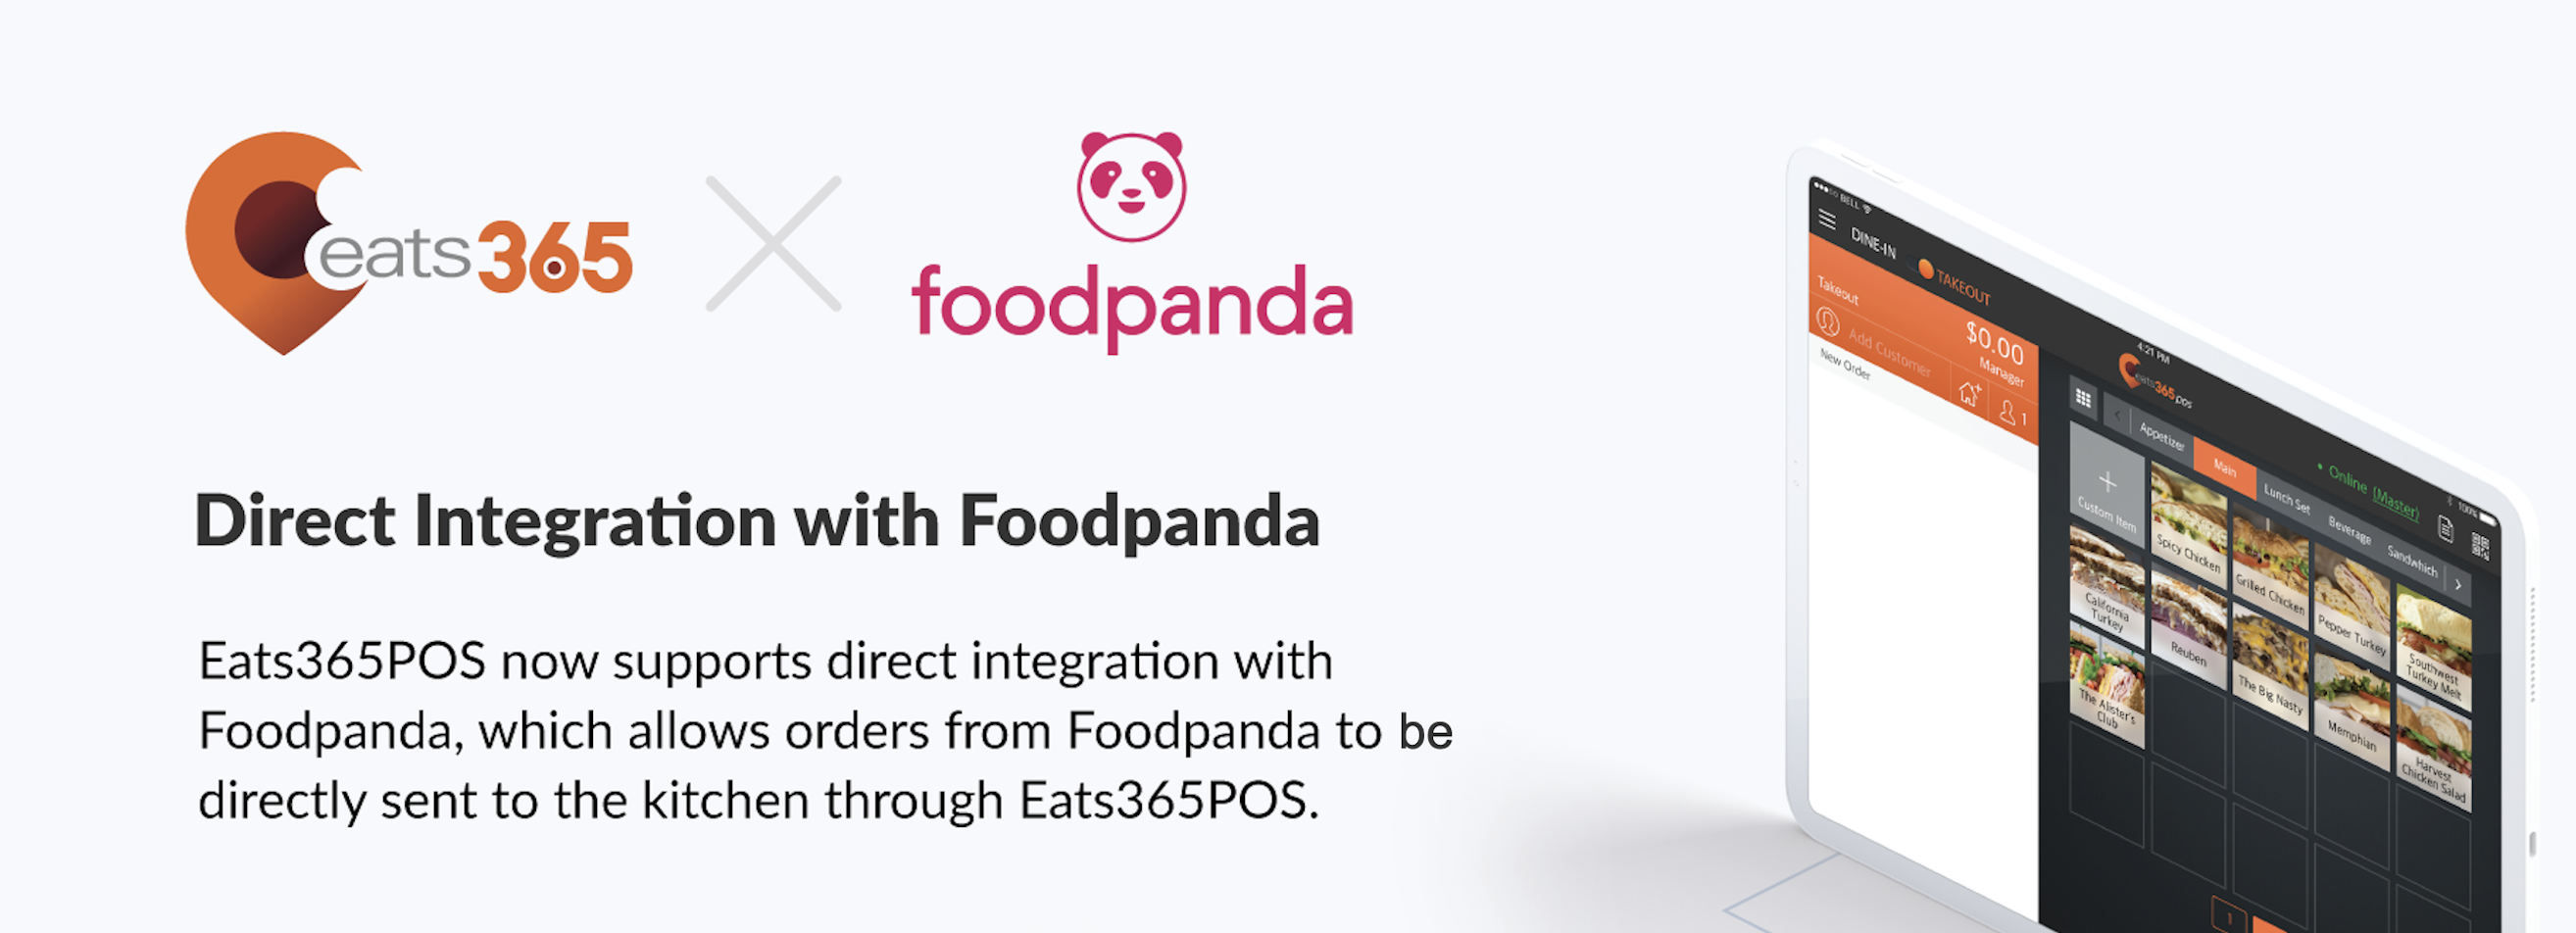 Eats365 Integrates With Foodpanda to Provide Automated Delivery Experience